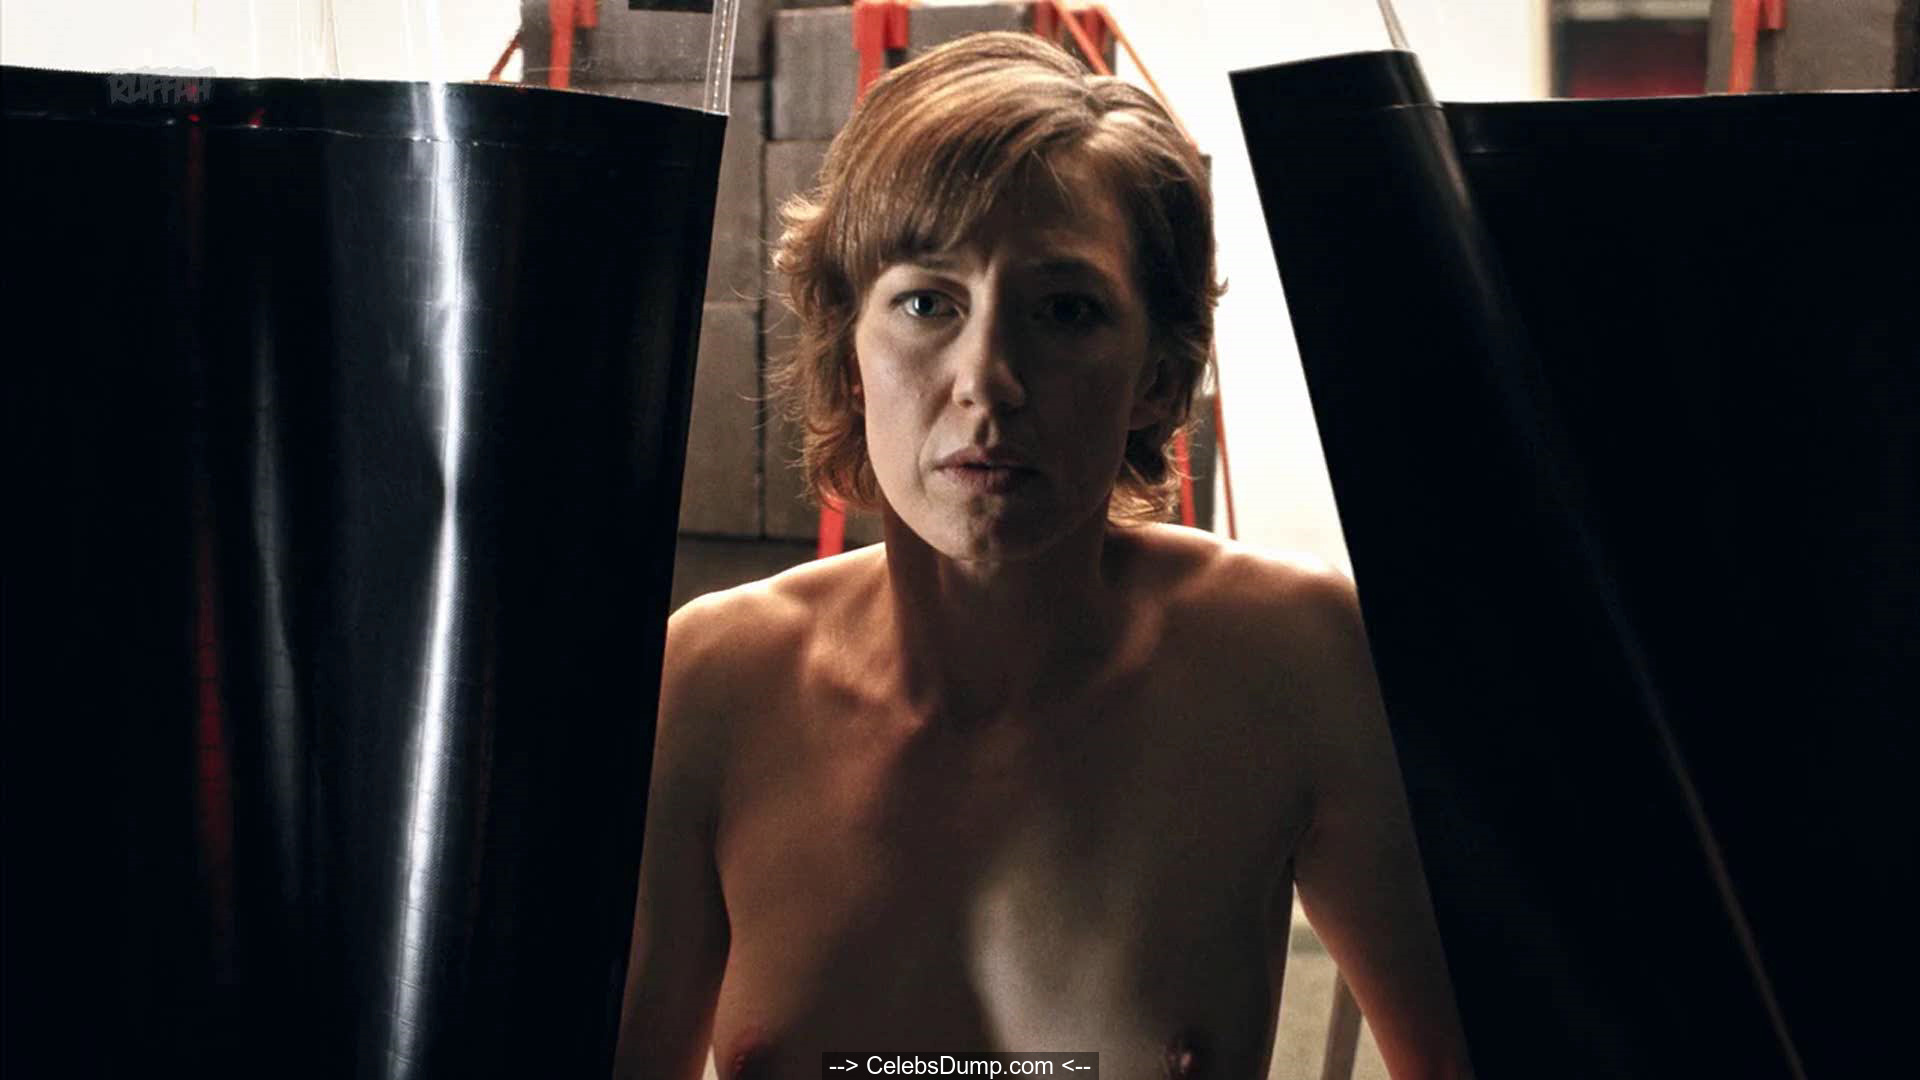 Carrie coon nude pics